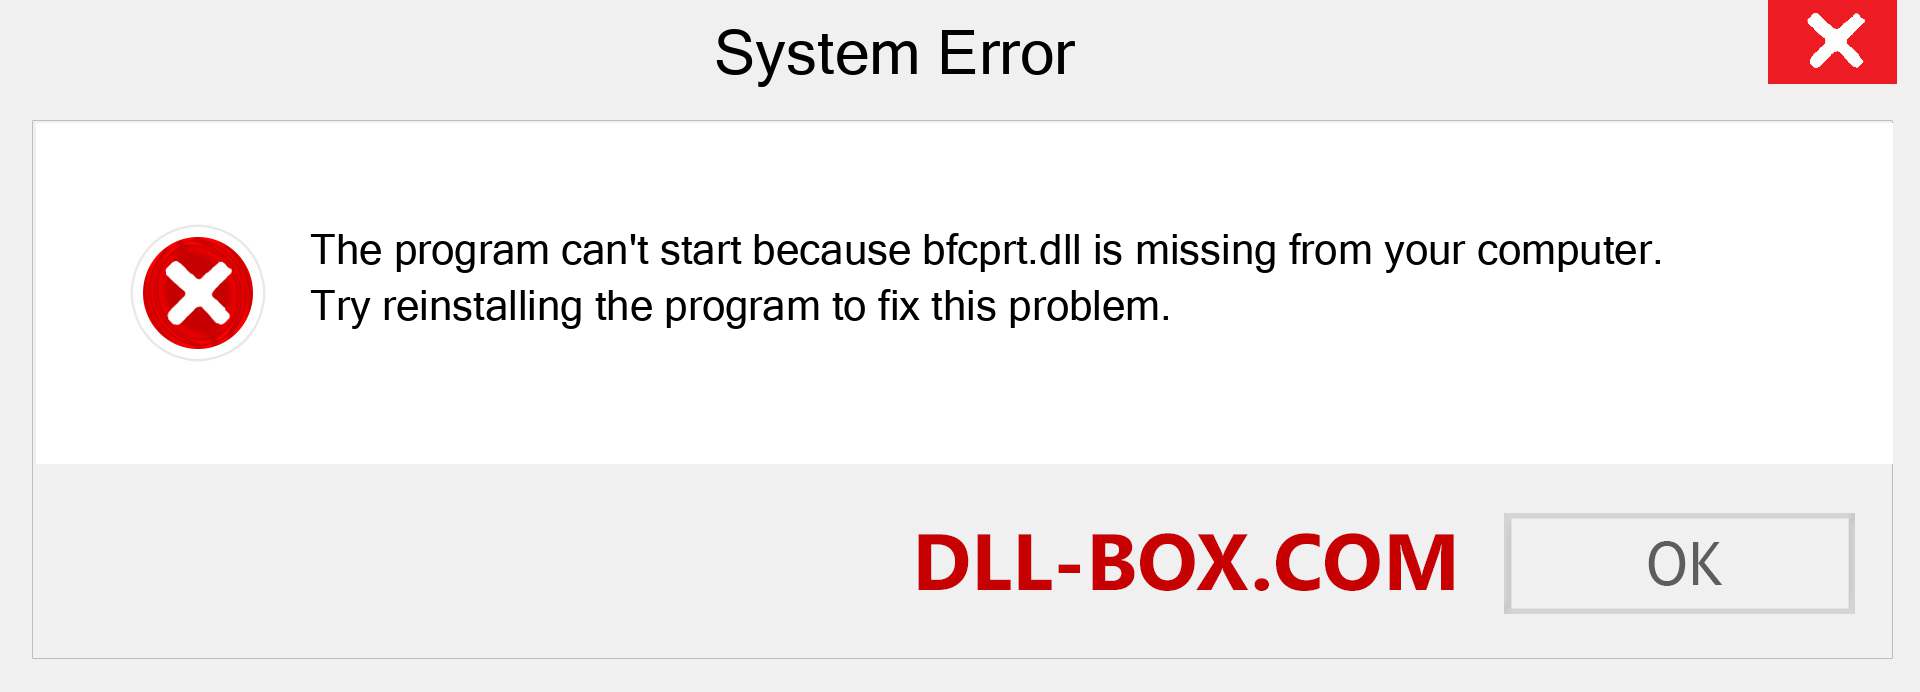  bfcprt.dll file is missing?. Download for Windows 7, 8, 10 - Fix  bfcprt dll Missing Error on Windows, photos, images